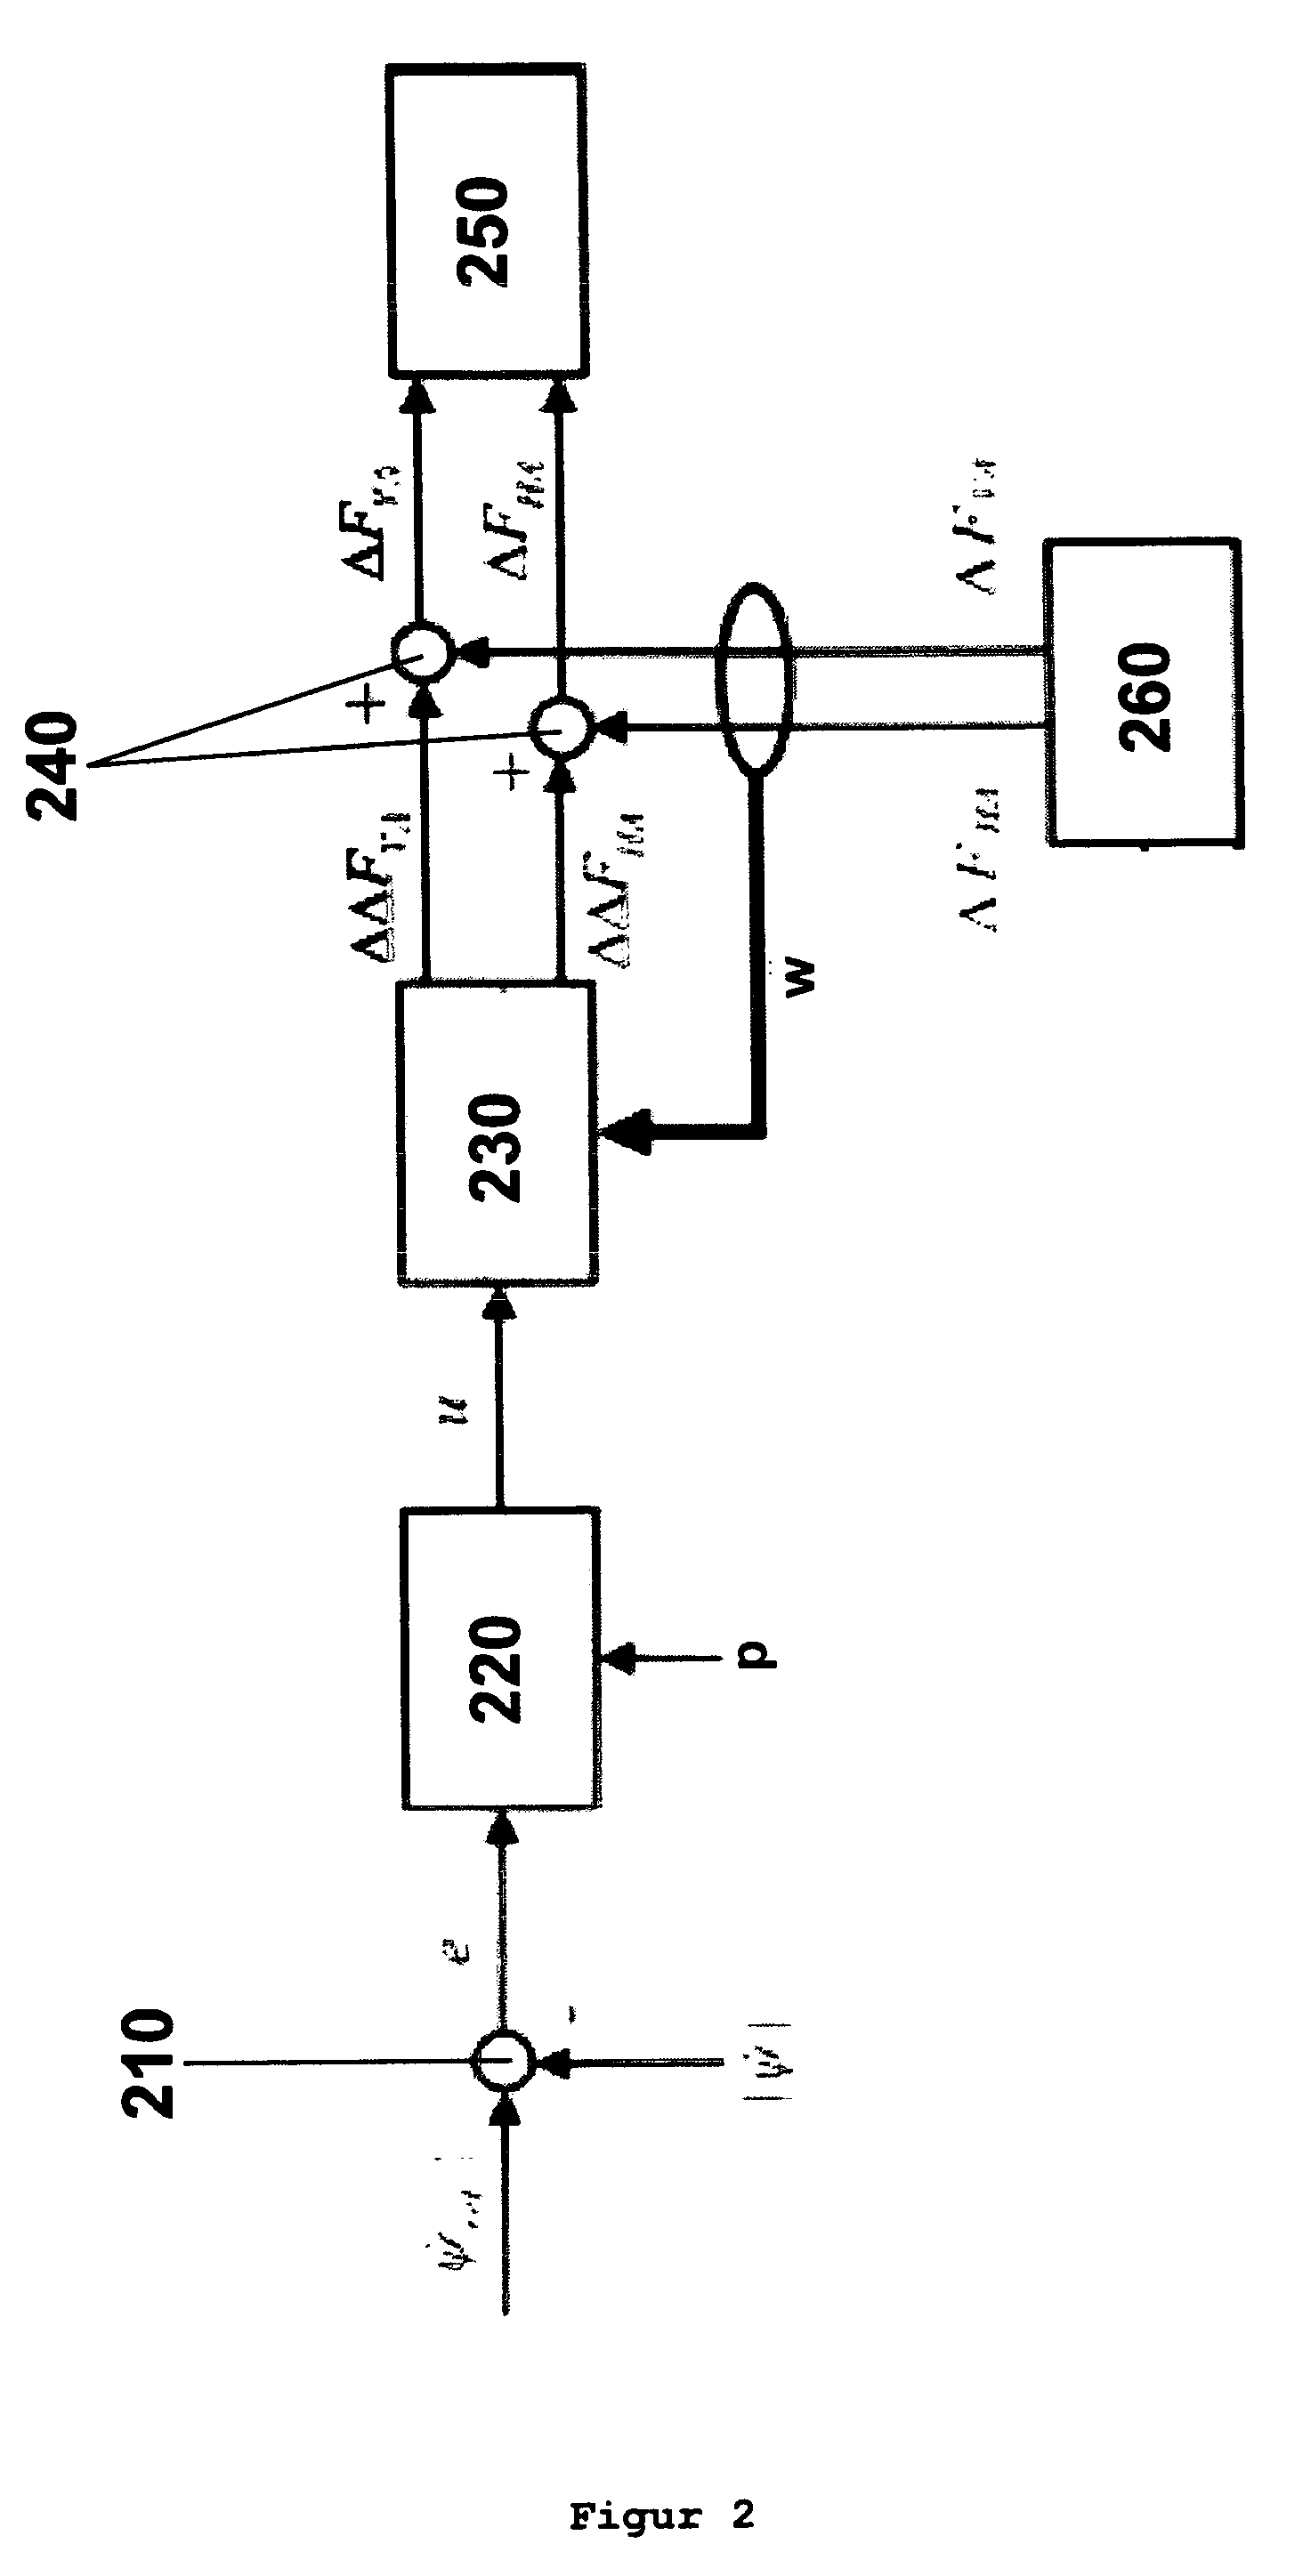 Method for Controlling the Driving Dynamics of a Vehicle, Device for Implementing the Method and Use Thereof